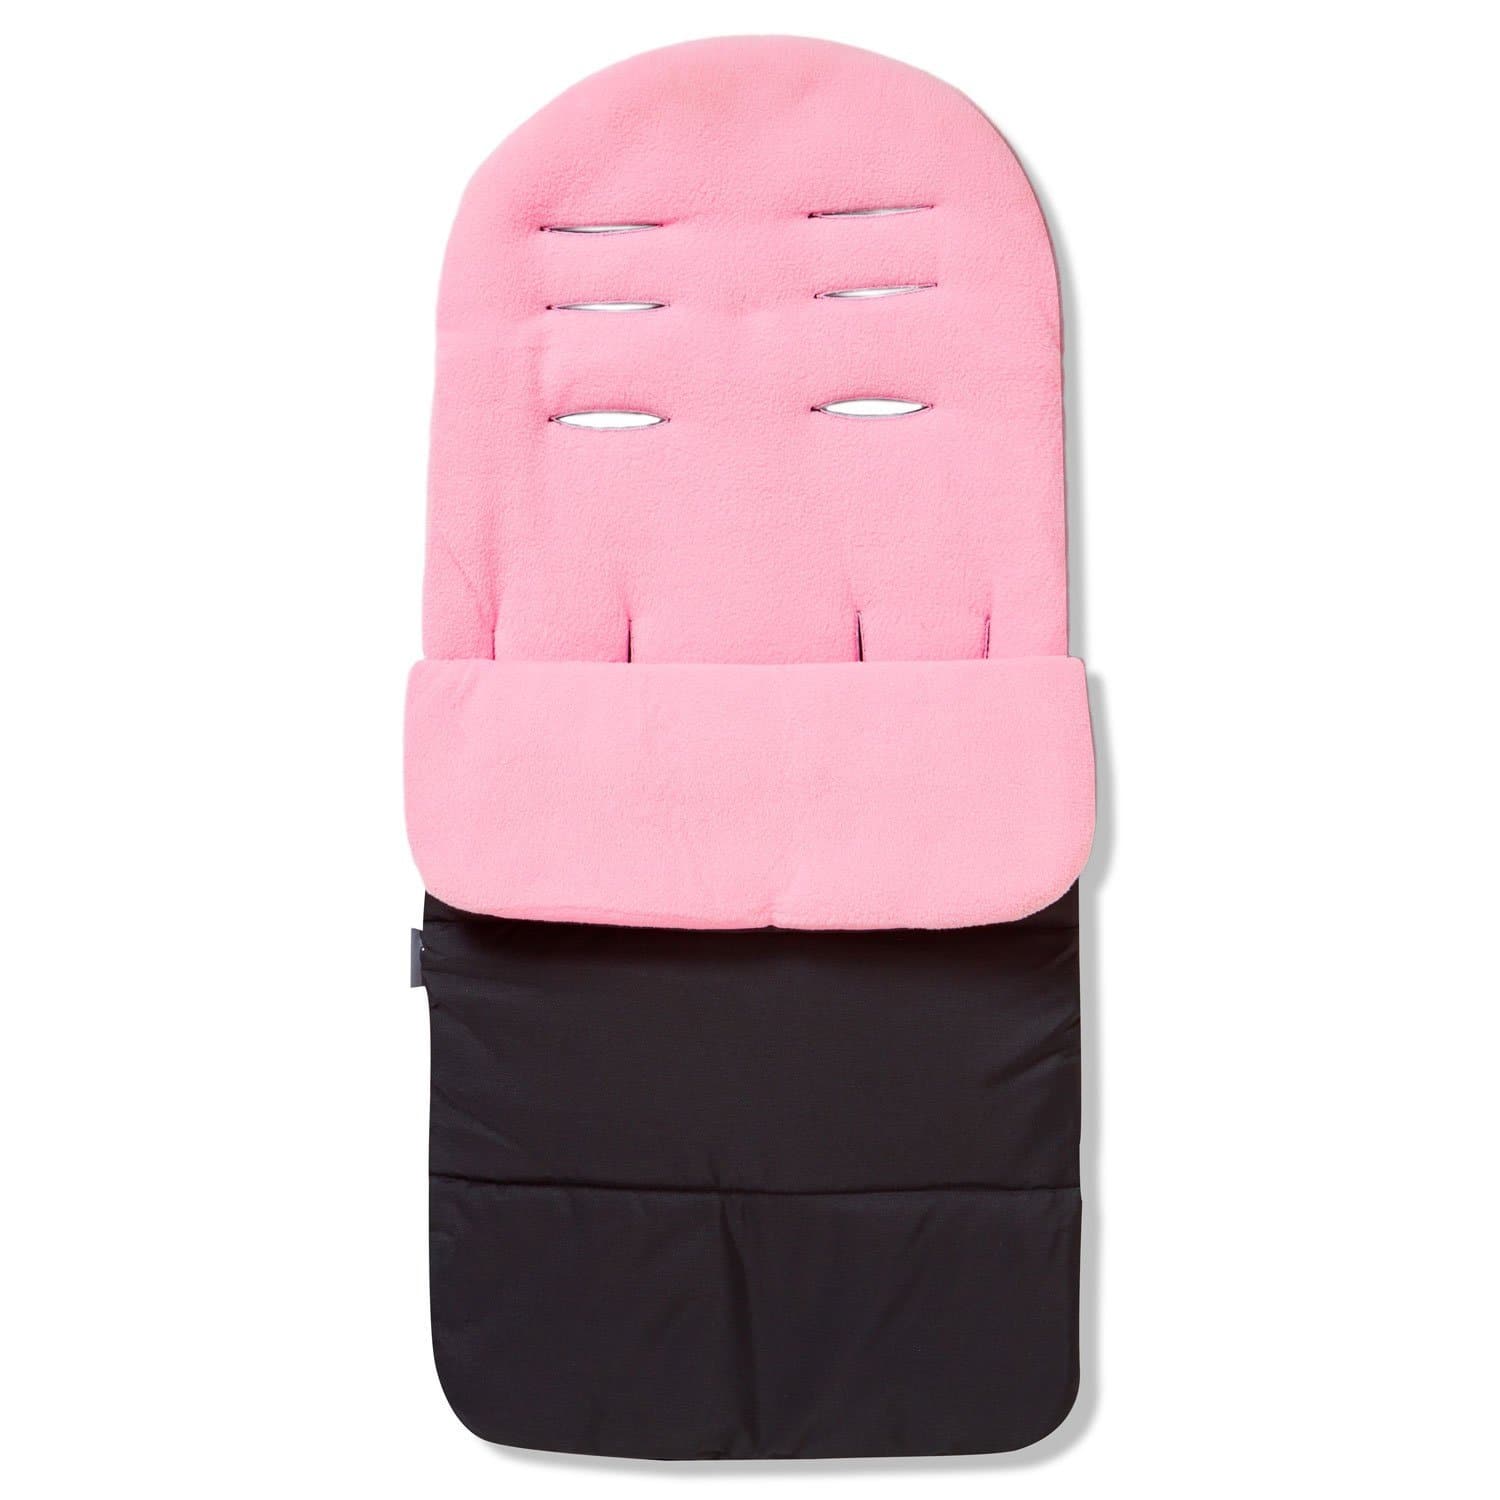 Premium Footmuff / Cosy Toes Compatible with Casual - For Your Little One